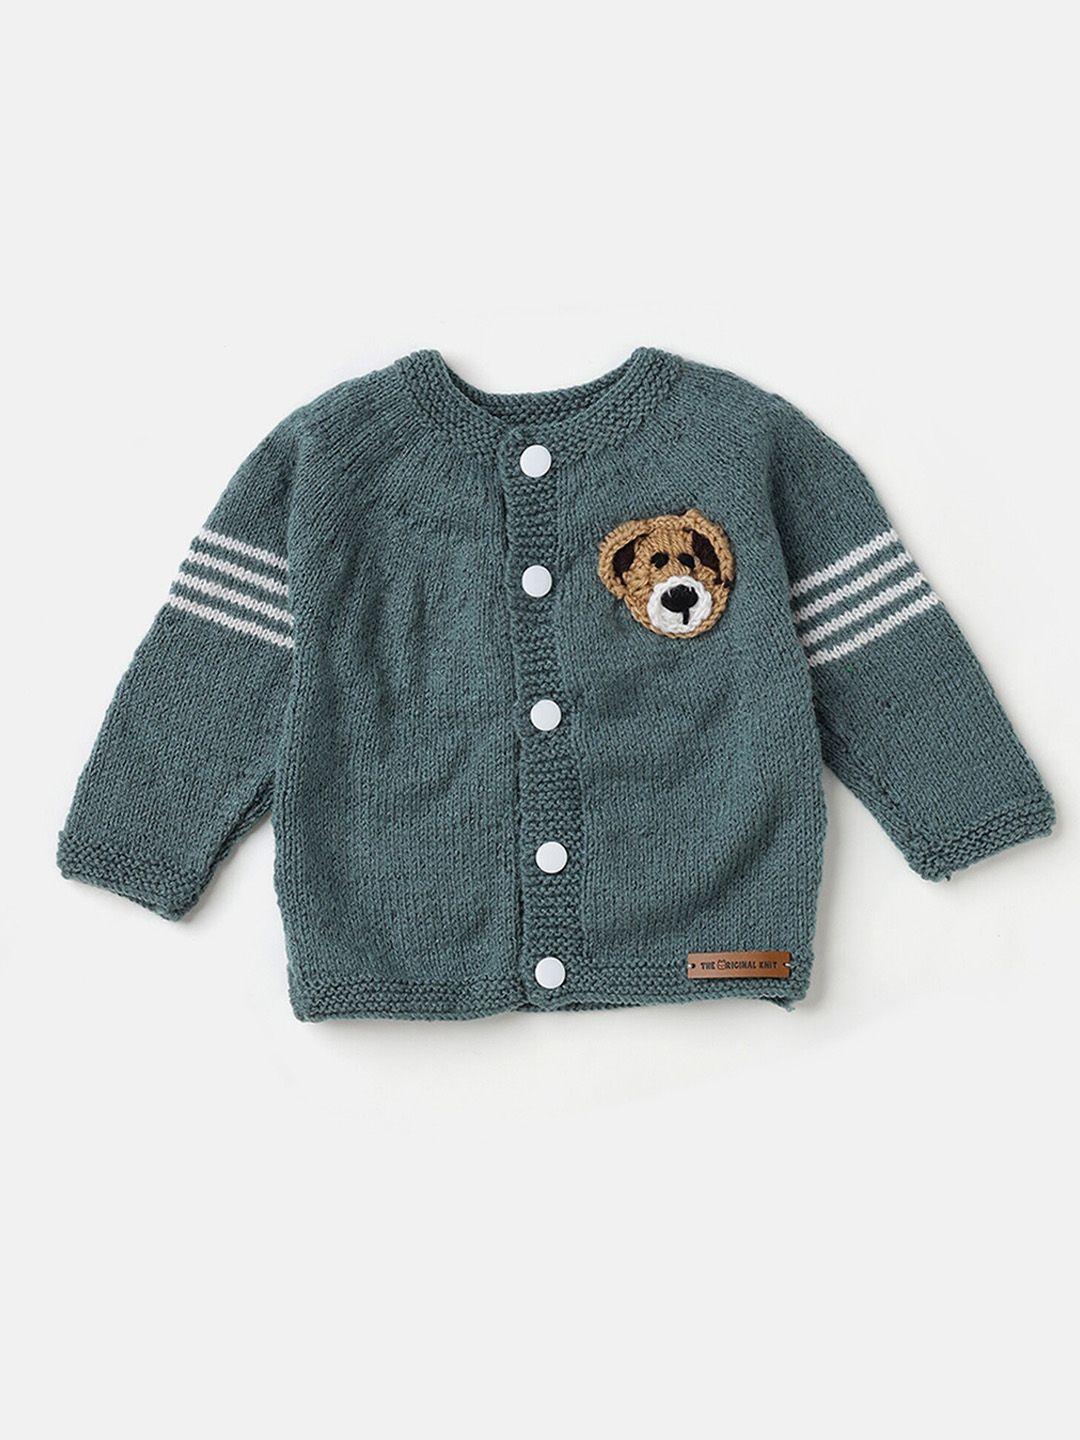 the original knit unisex kids grey & green striped cardigan with applique detail